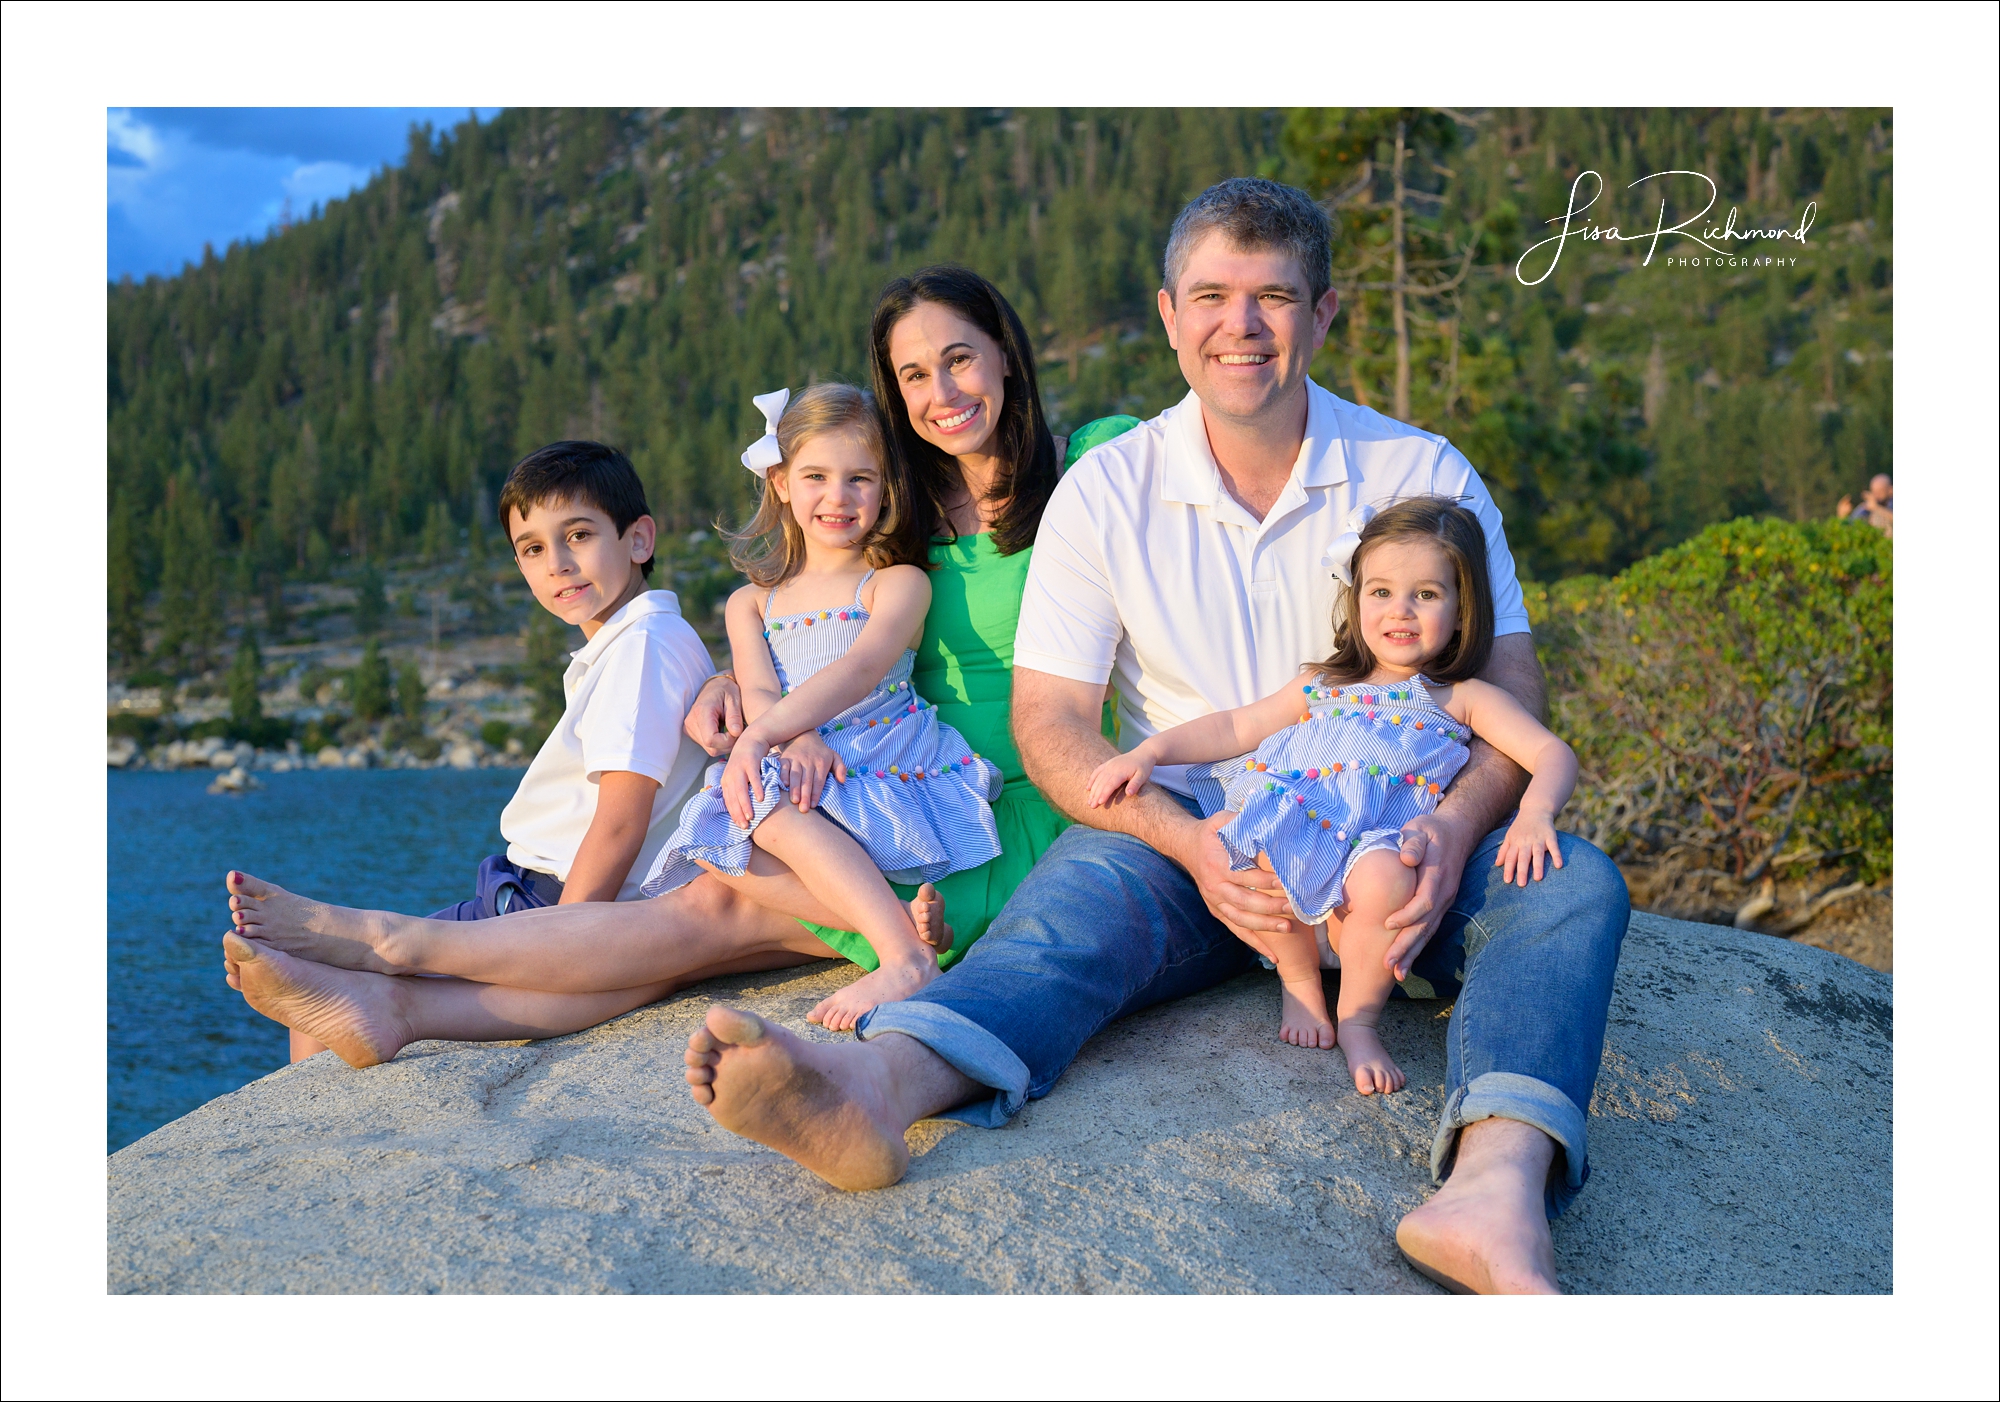 The Weinberger family at Sand Harbor